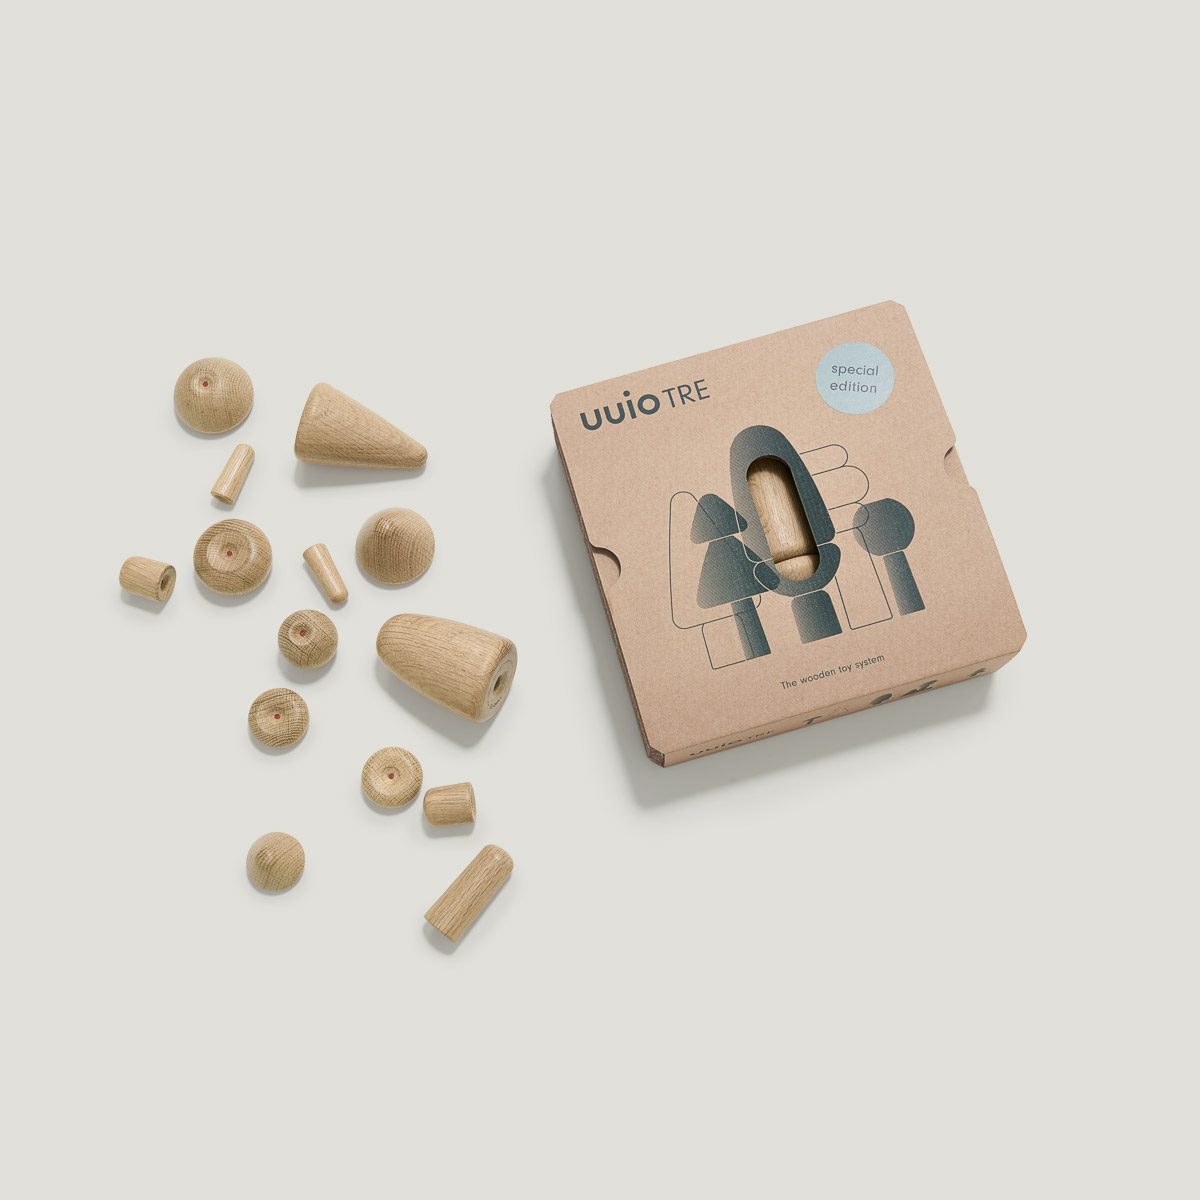 TRE special edition wooden toy packaging